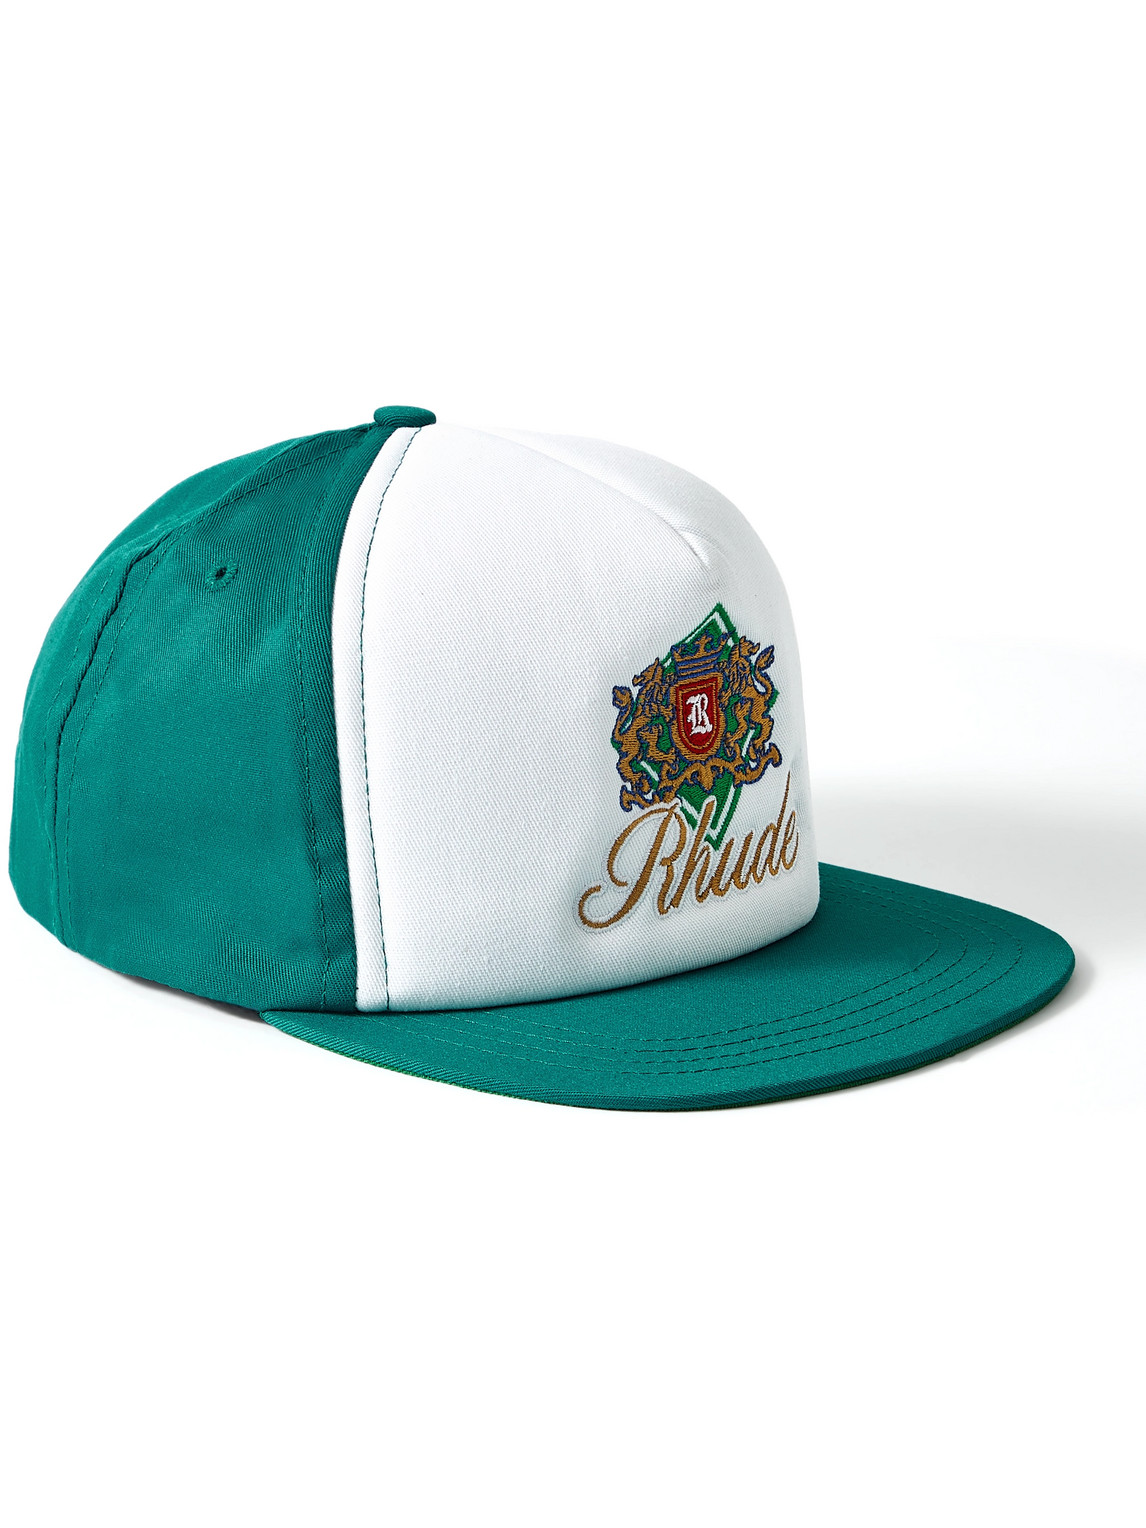 Menthol Crest Logo-Embroidered Twill Trucker Cap